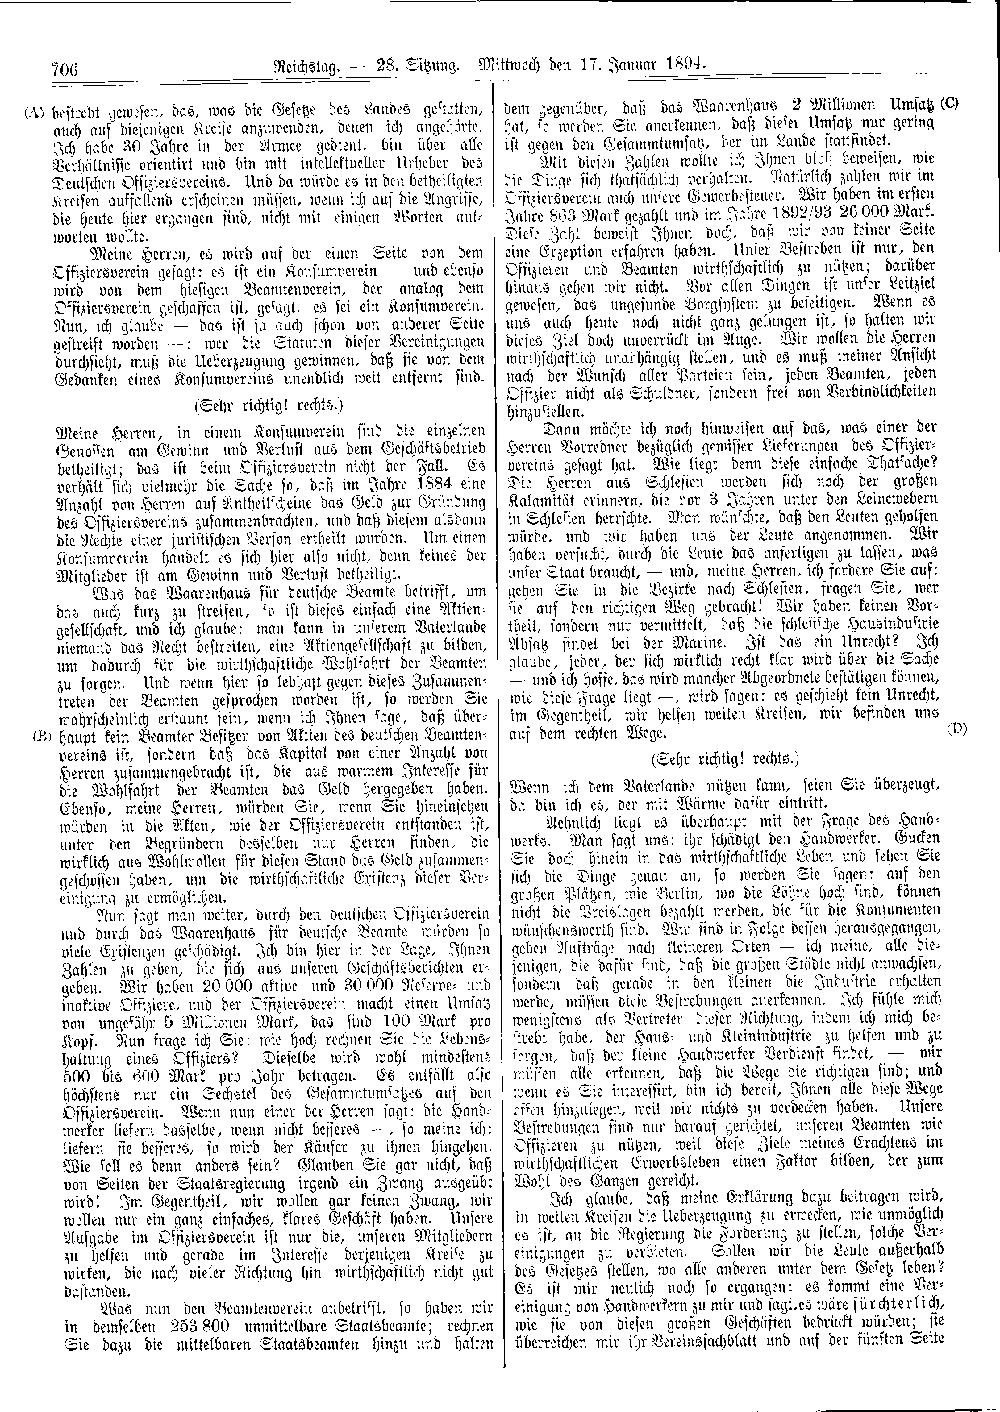 Scan of page 706